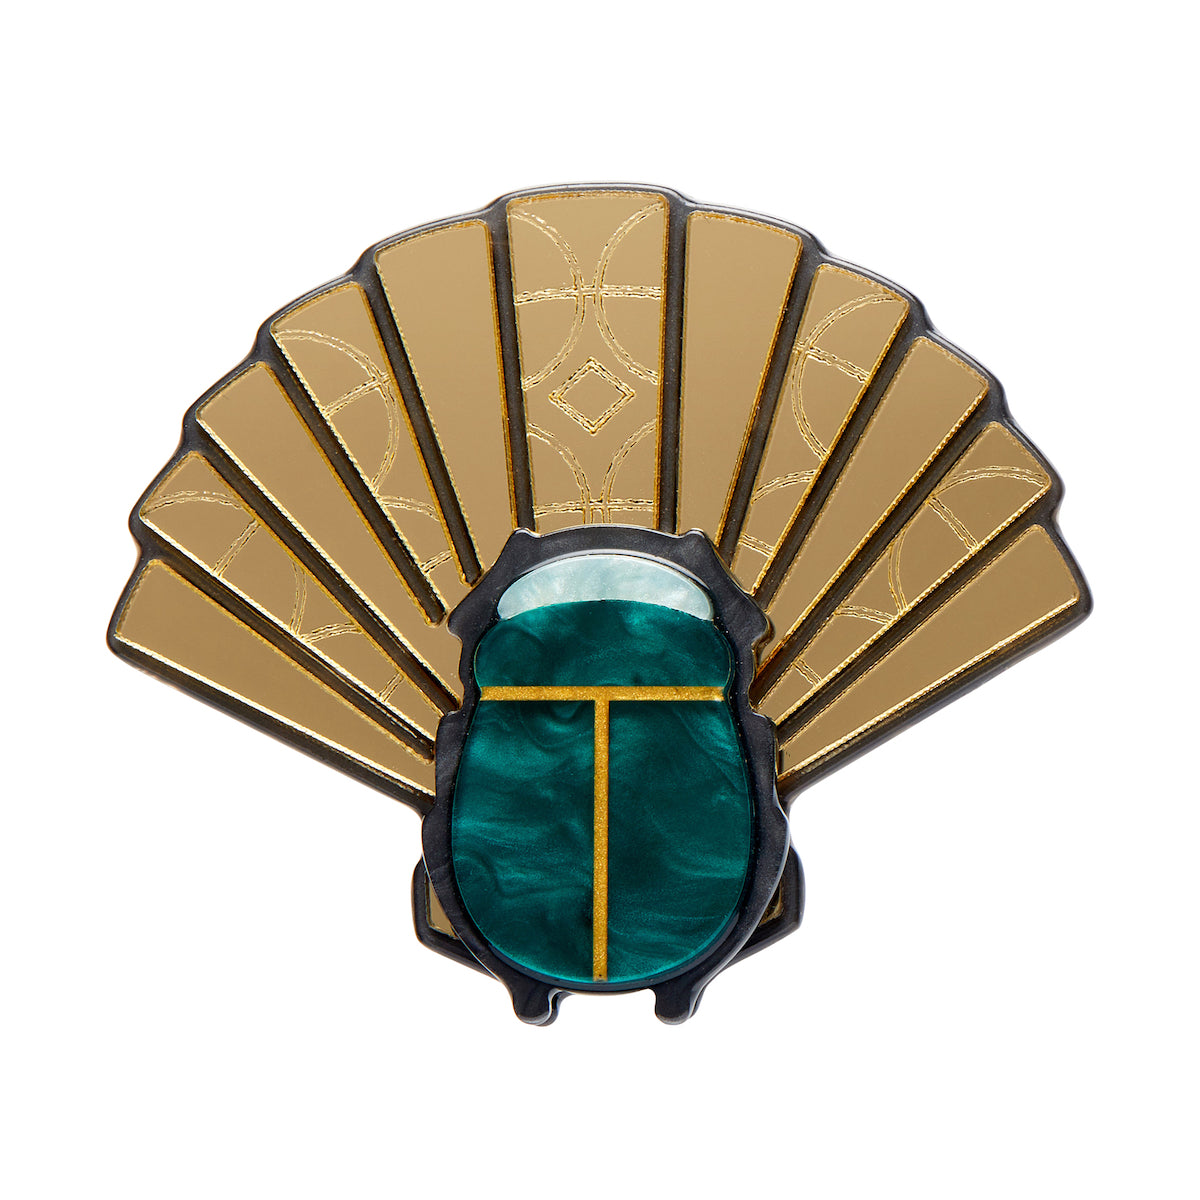 Egyptian Revival Collection "The Heart of Egypt" Scarab layered resin brooch